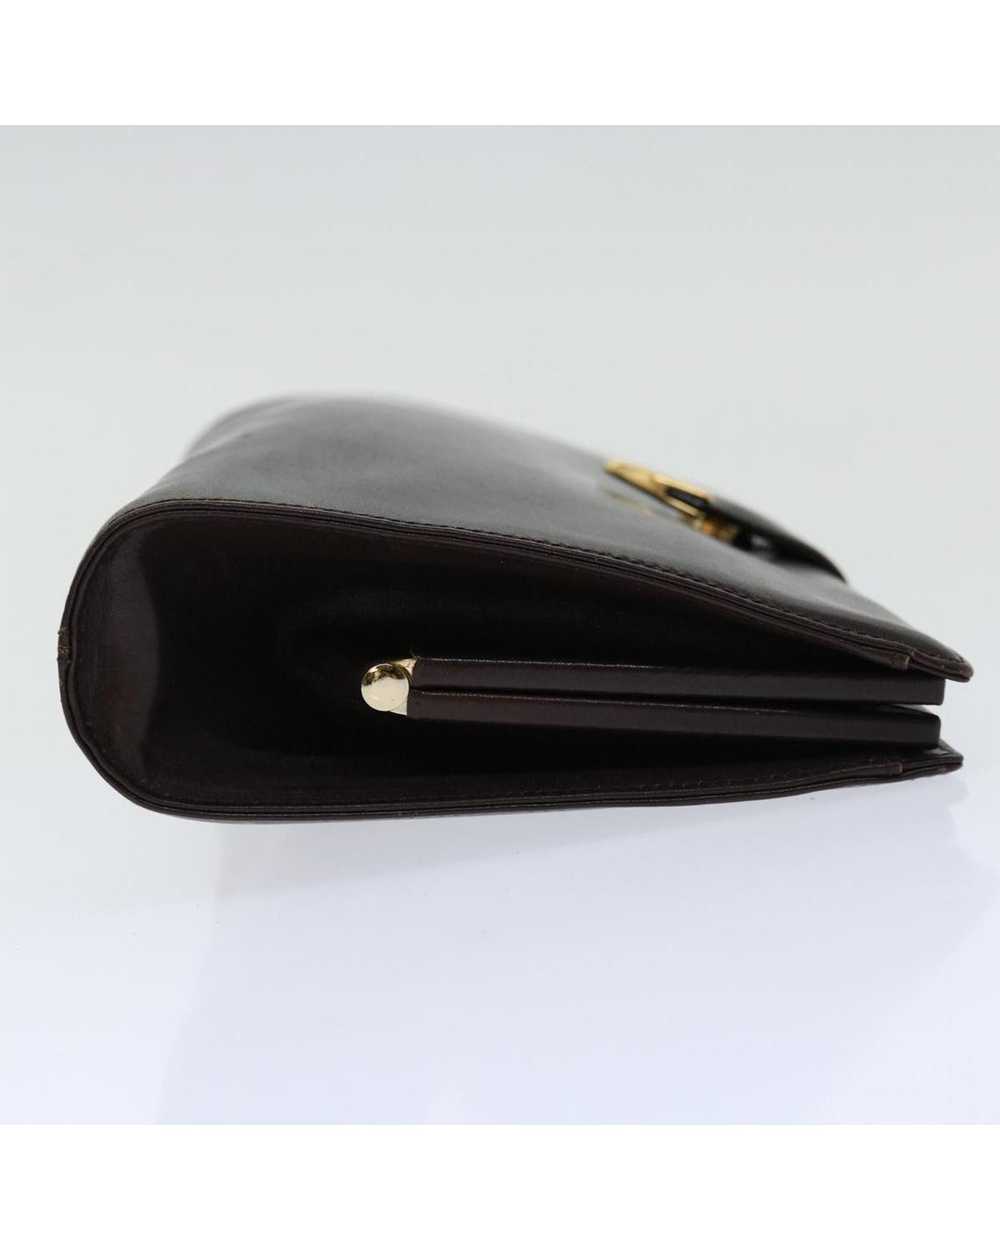 Givenchy Brown Leather Clutch Bag with Elegant De… - image 5